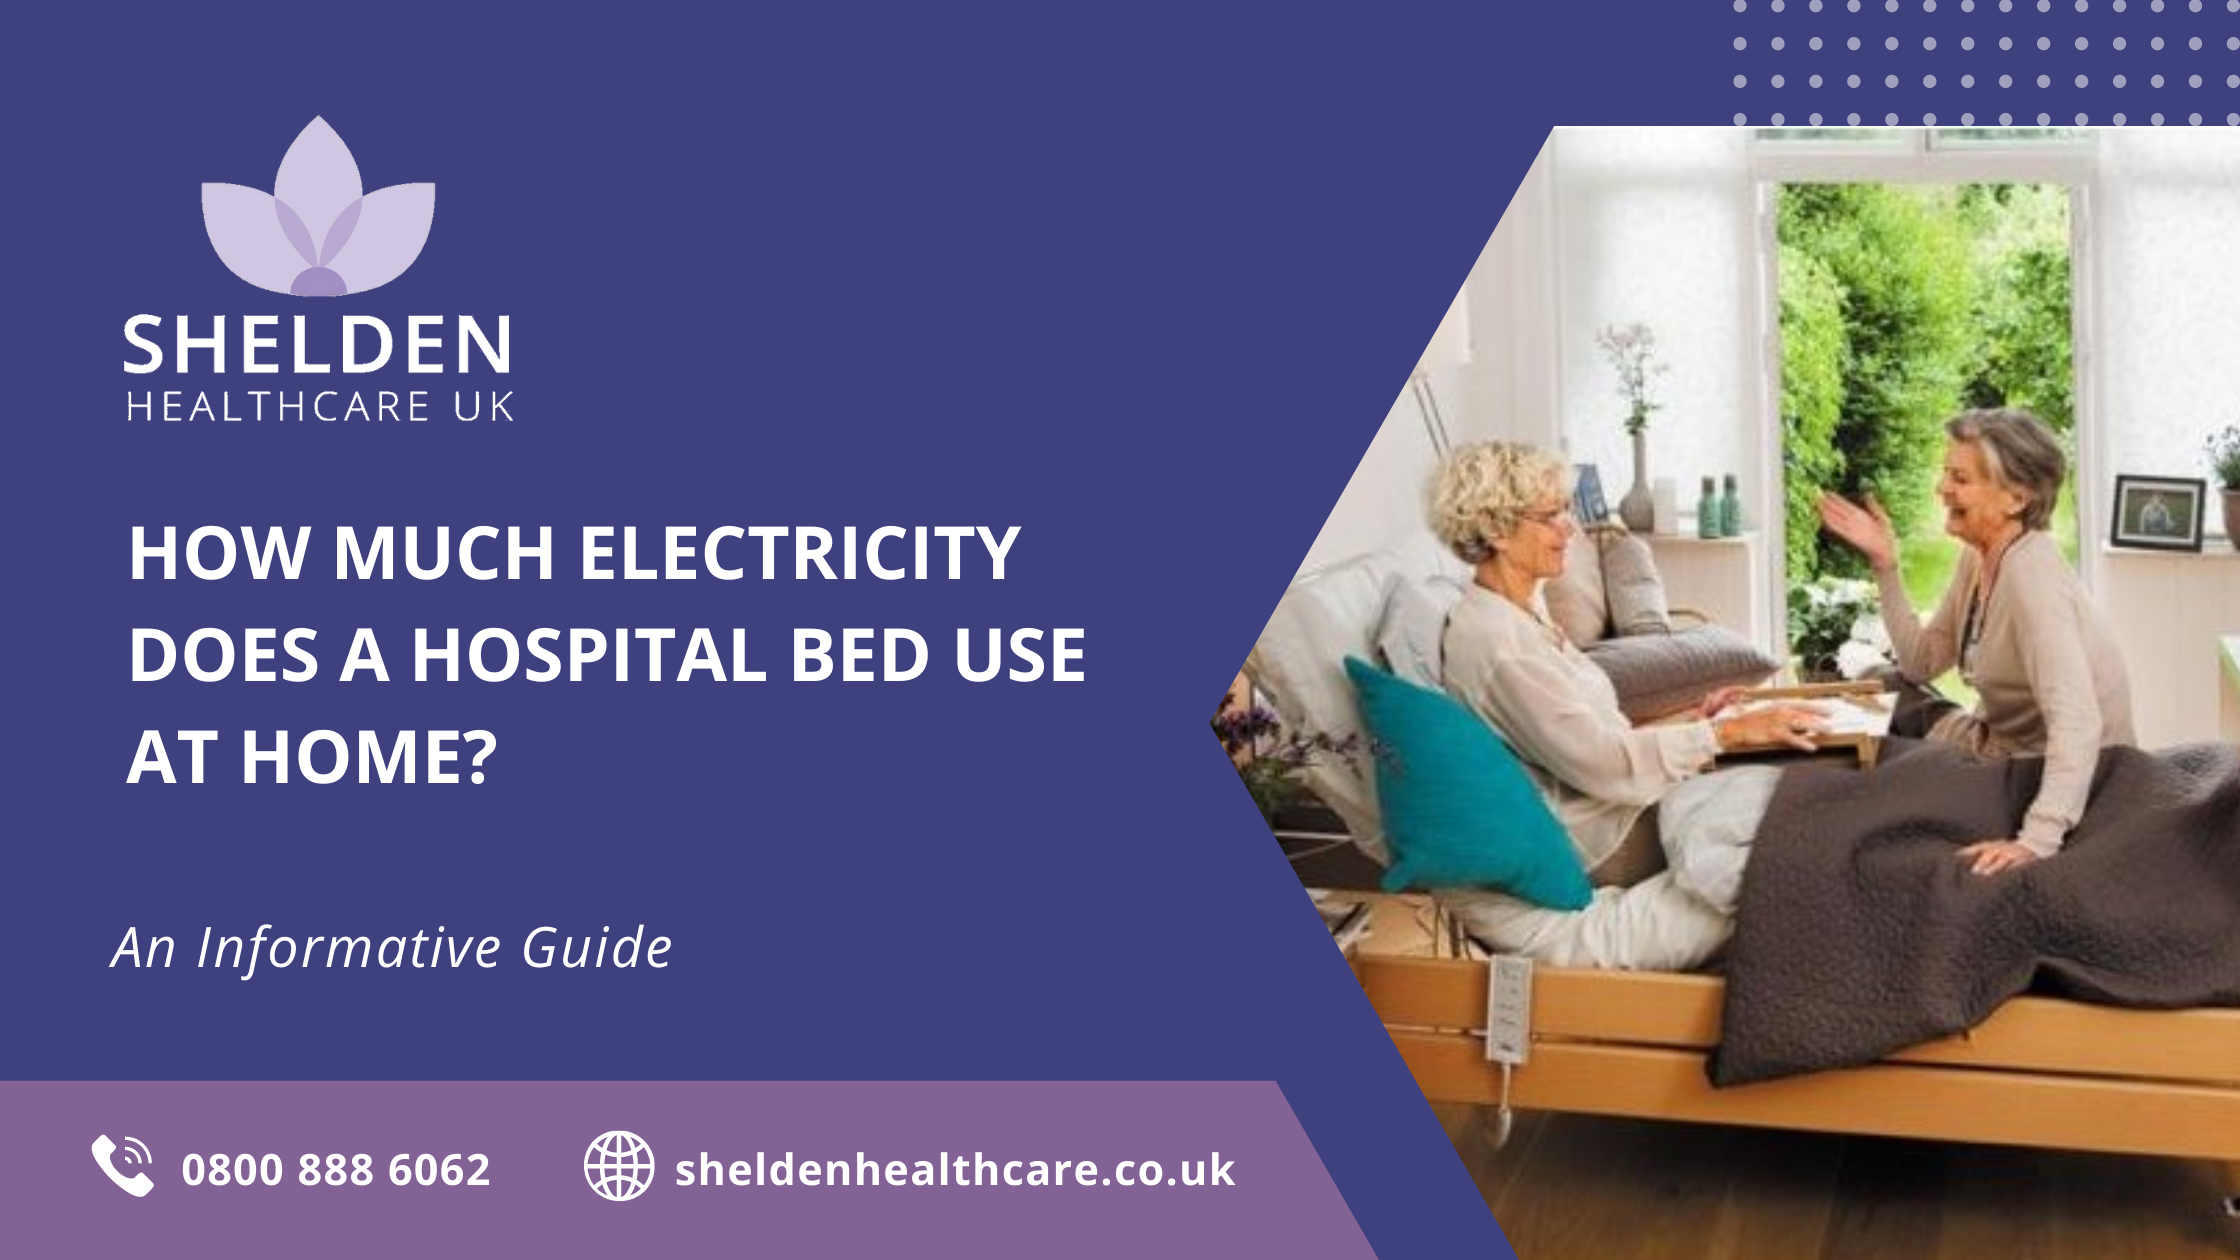 How Much Electricity Does a Hospital Bed Use at Home